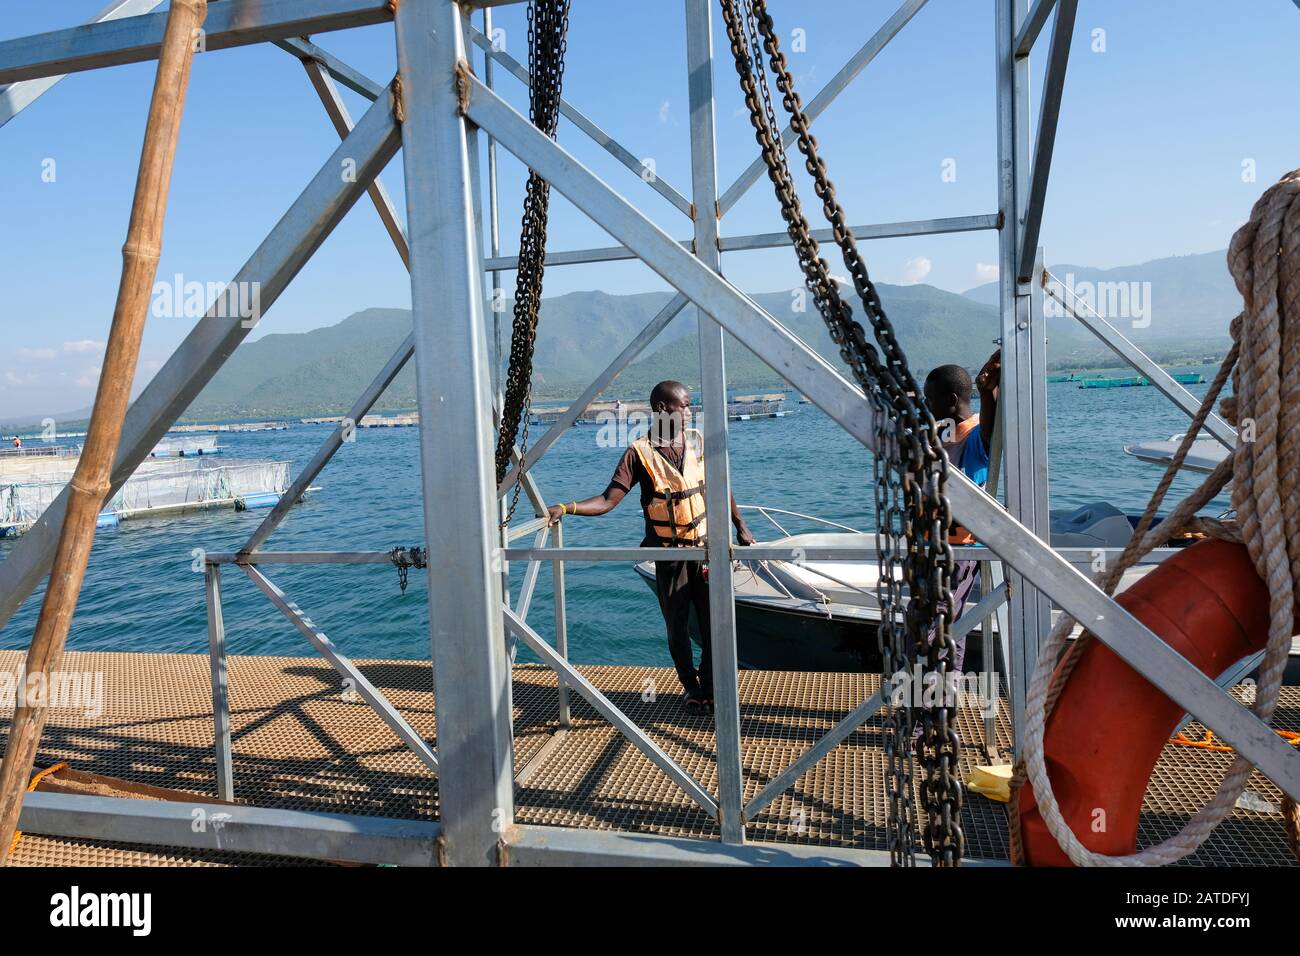 Employees of Victory Farms, Kenya's largest aquaculture firm, stand on a floating platform for fish farming on Lake Victoria Stock Photo